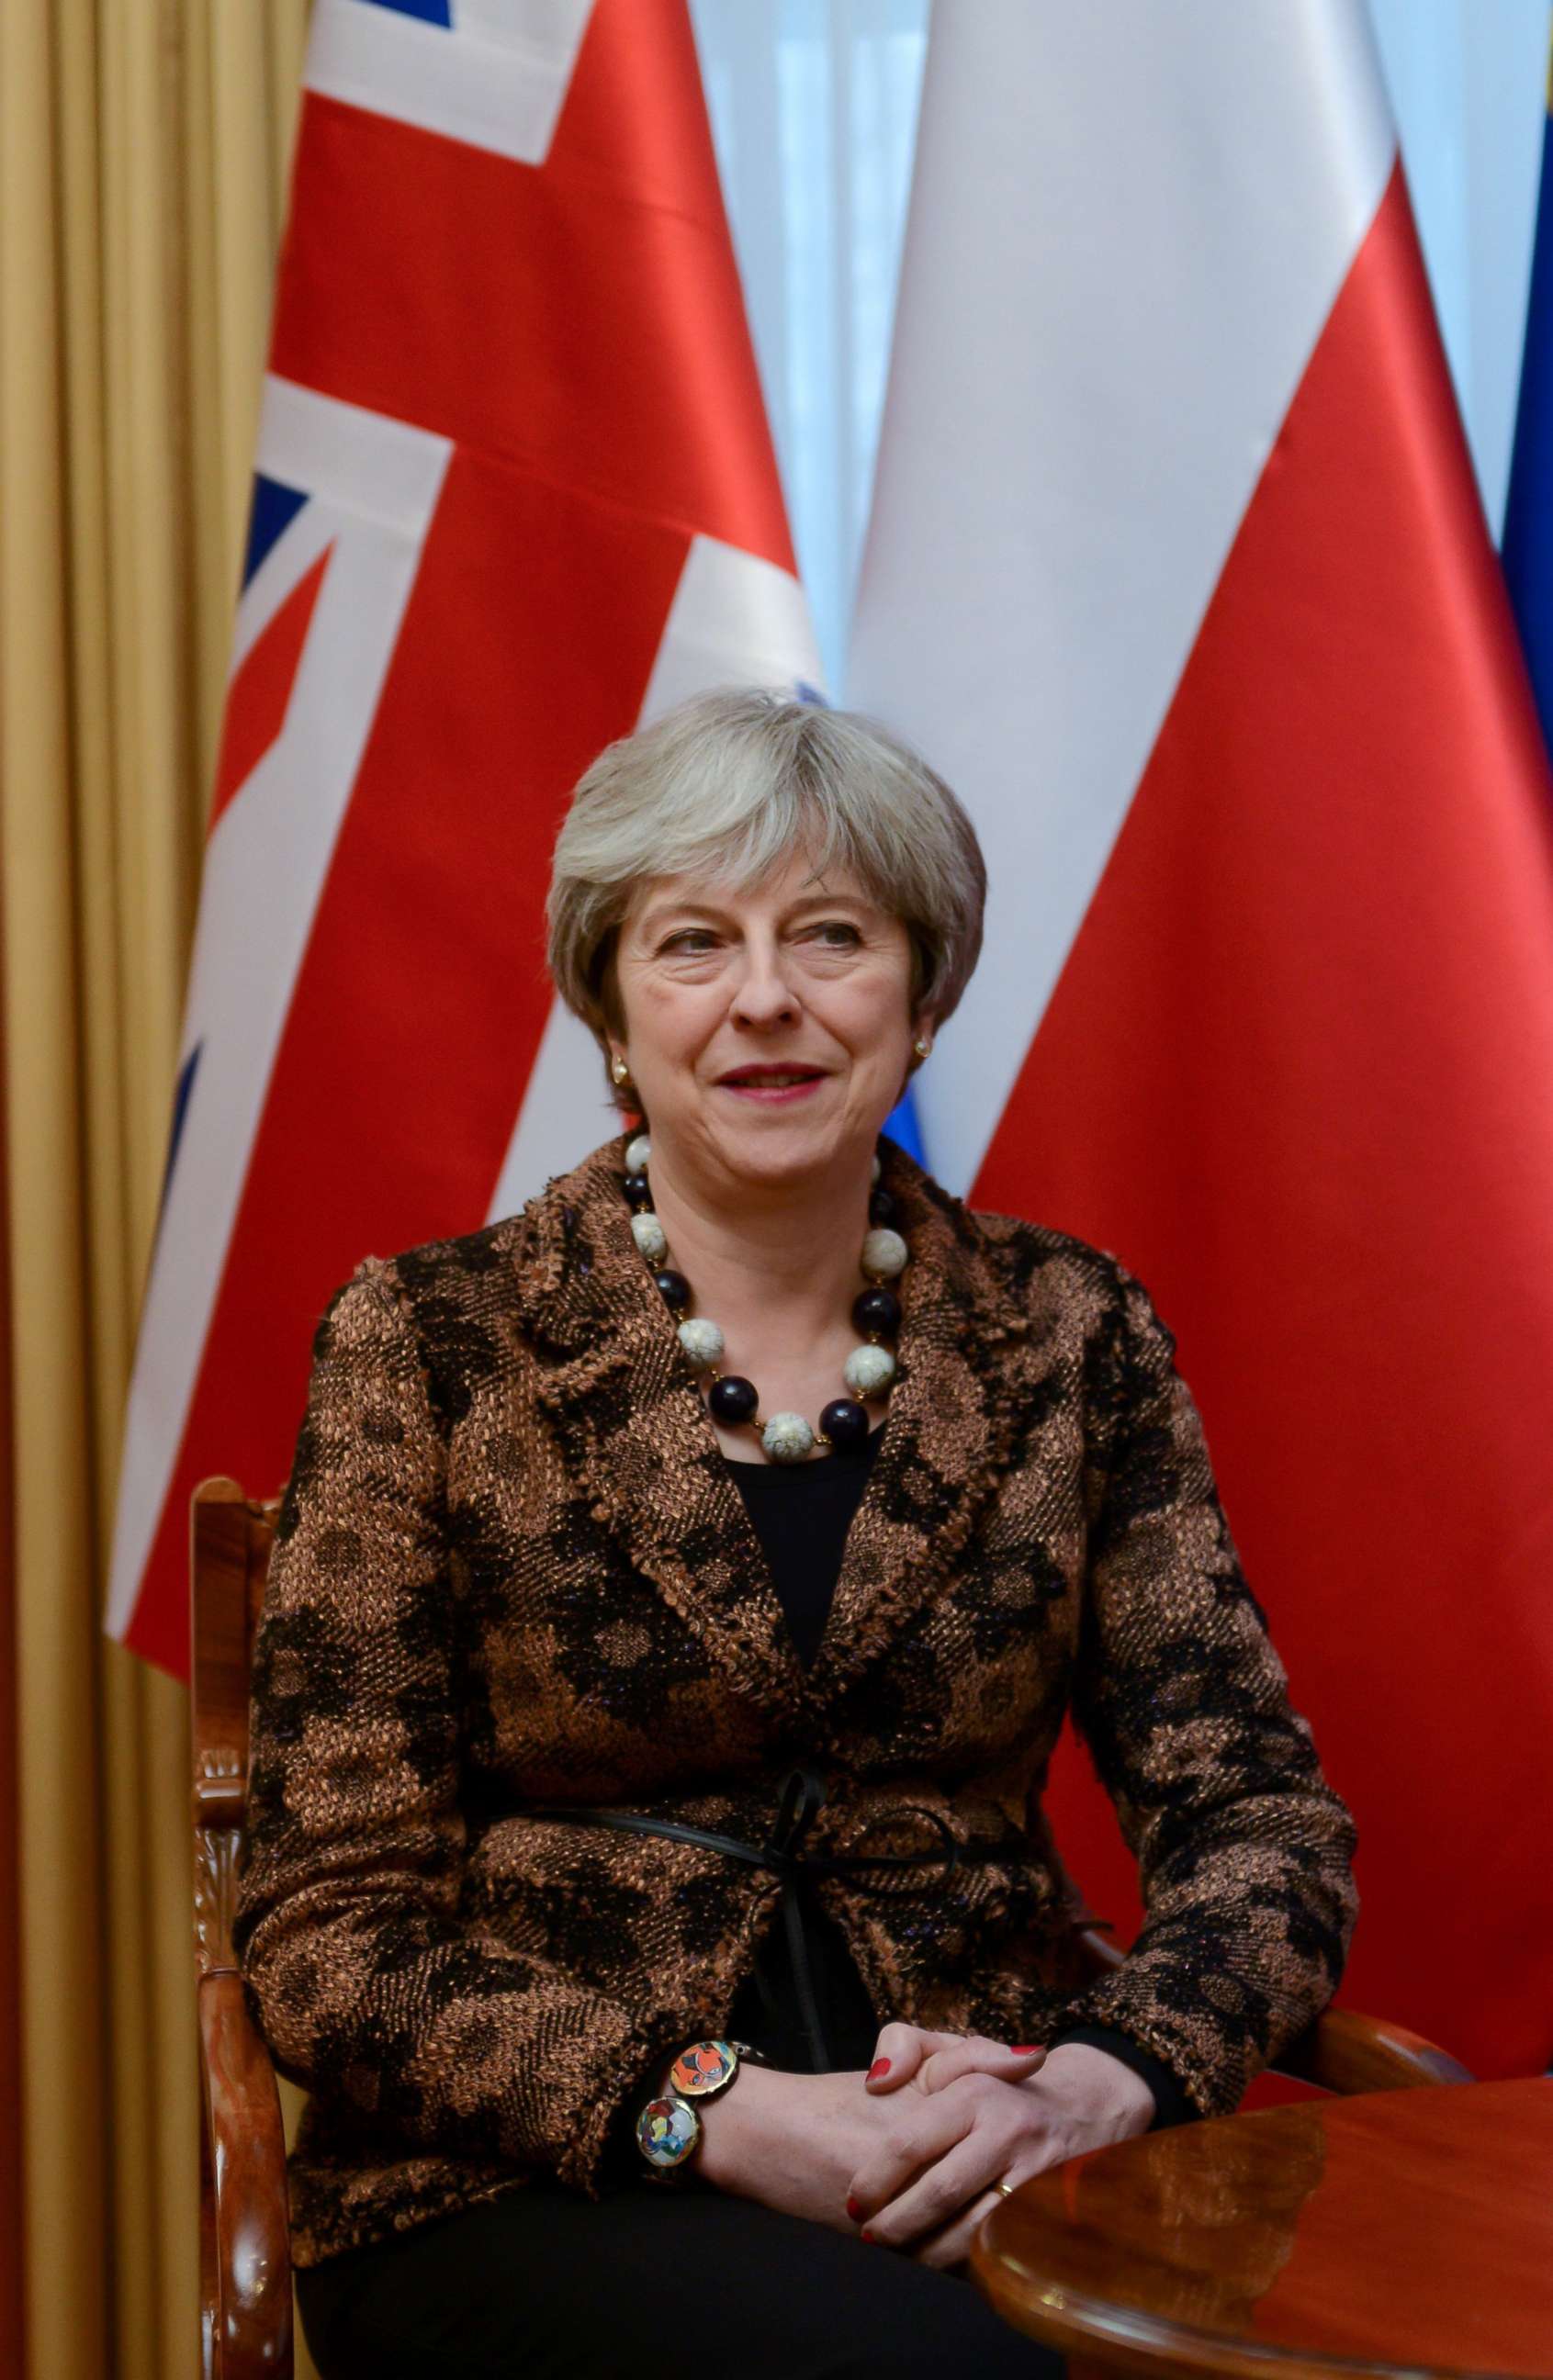 PHOTO: Britain's Prime Minister Theresa May is pictured during a meeting with Polish Prime Minister Mateusz Morawiecki at the Belvedere Palace in Warsaw, Poland, Dec. 21, 2017. 